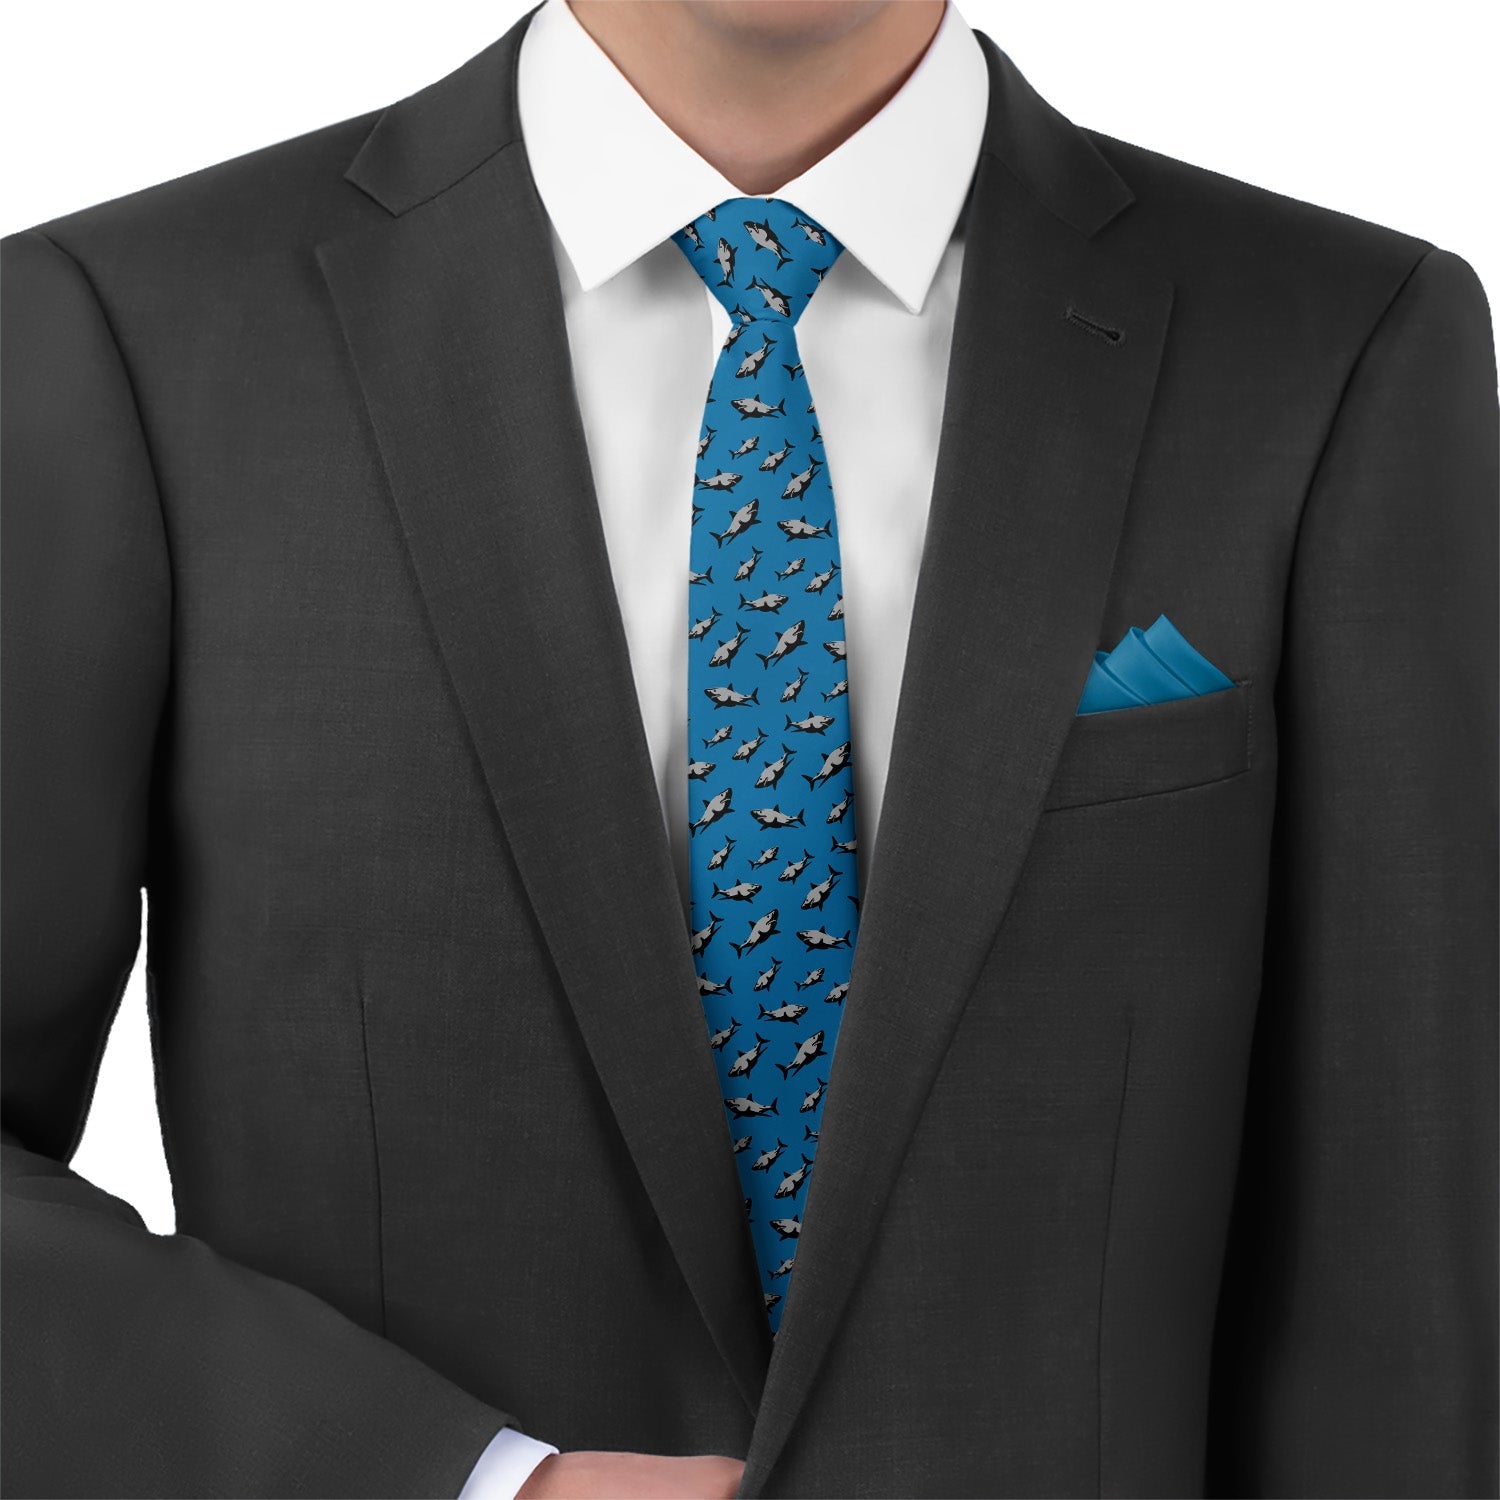 Sharks Necktie - Matching Pocket Square - Knotty Tie Co.